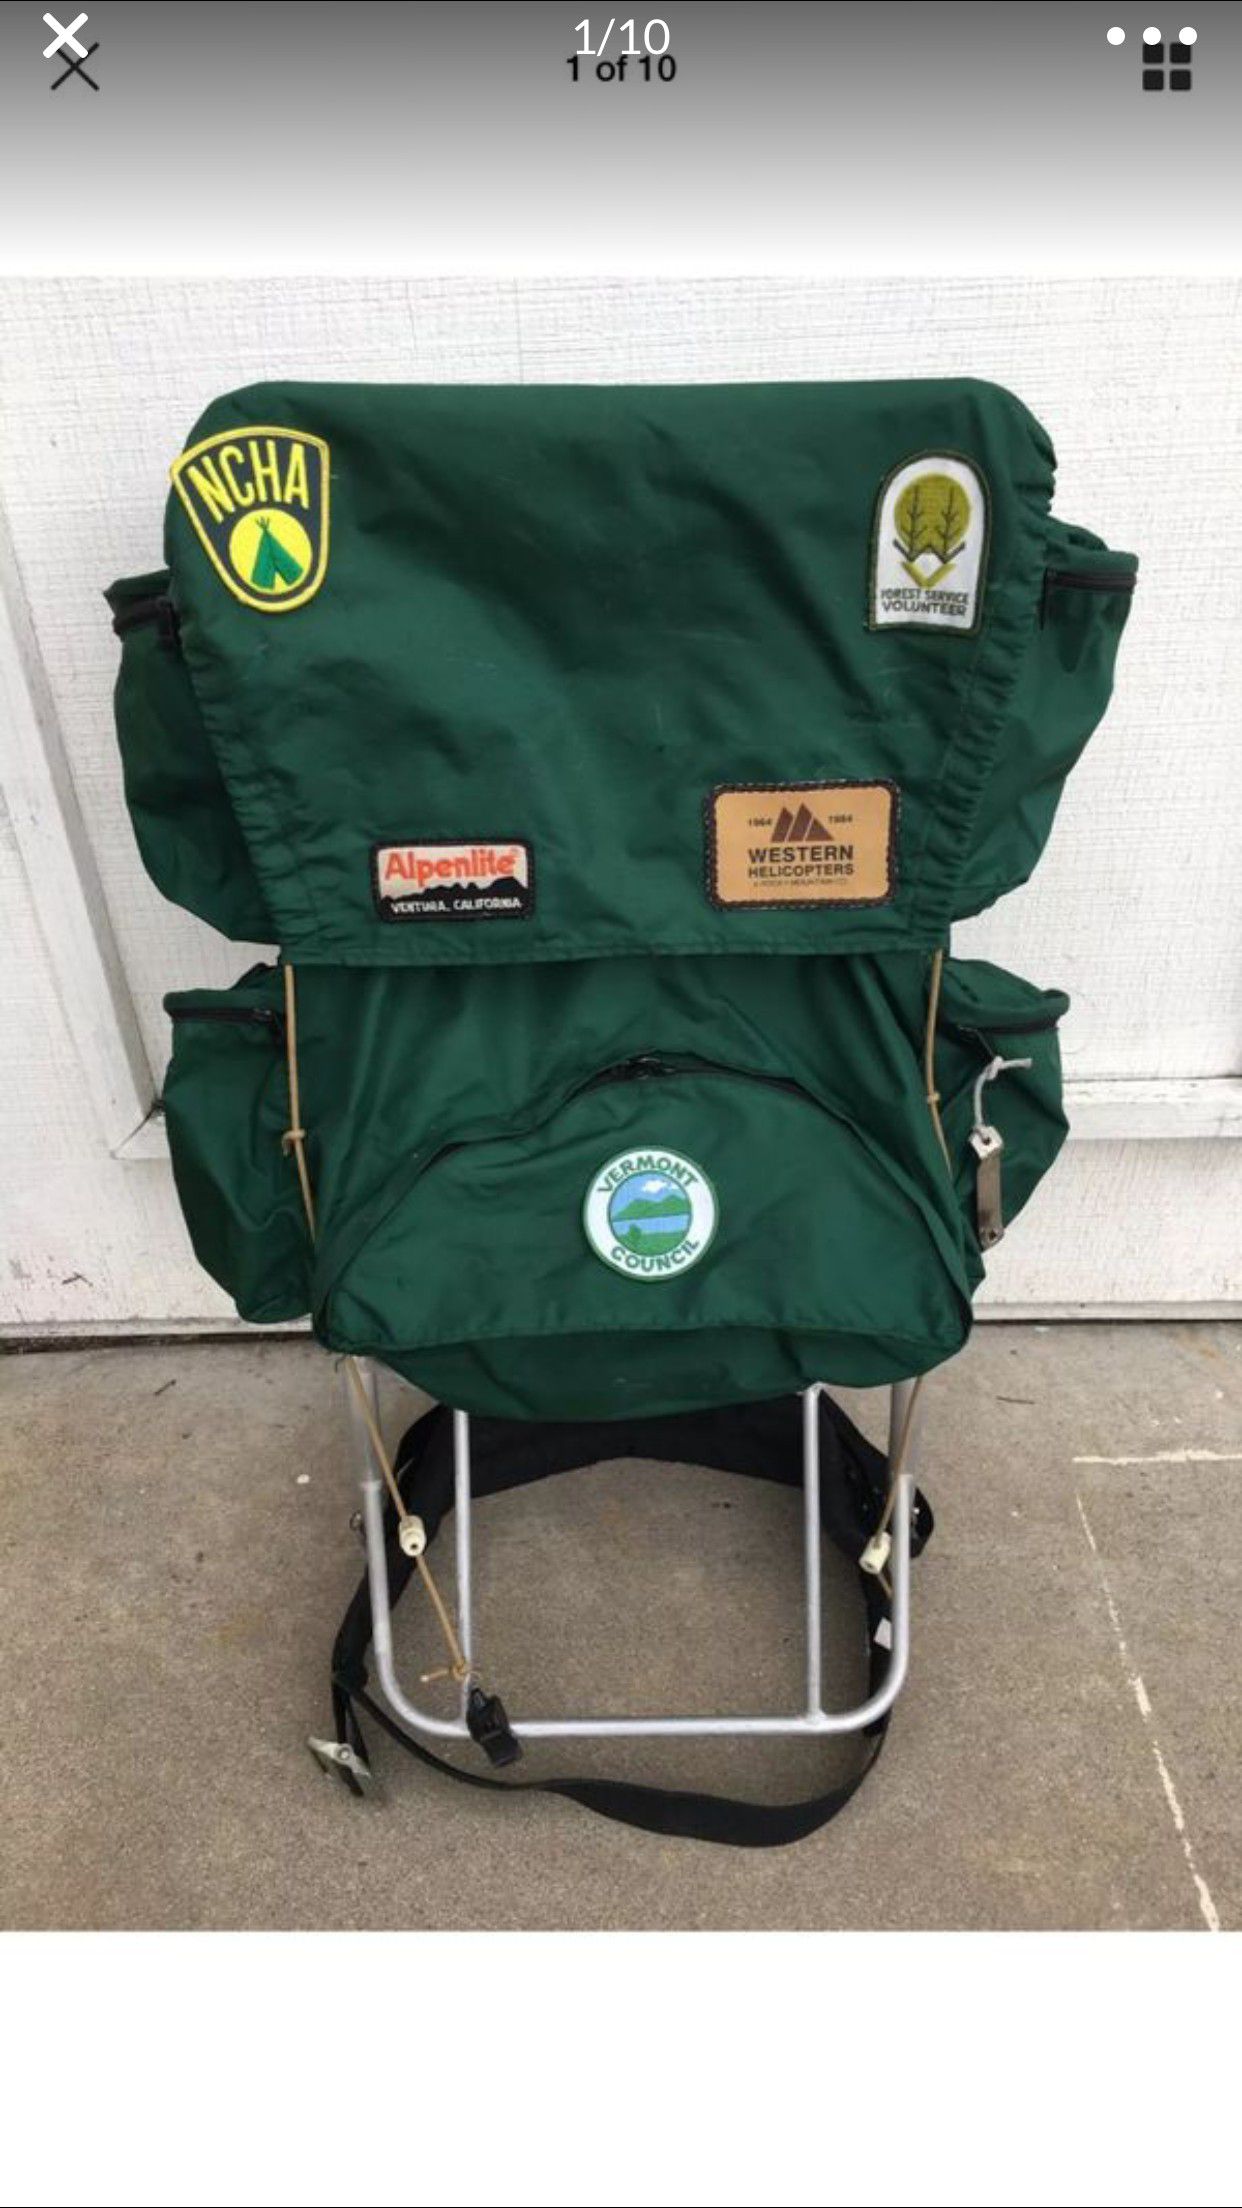 Vintage Hiking Backpack with vintage patches